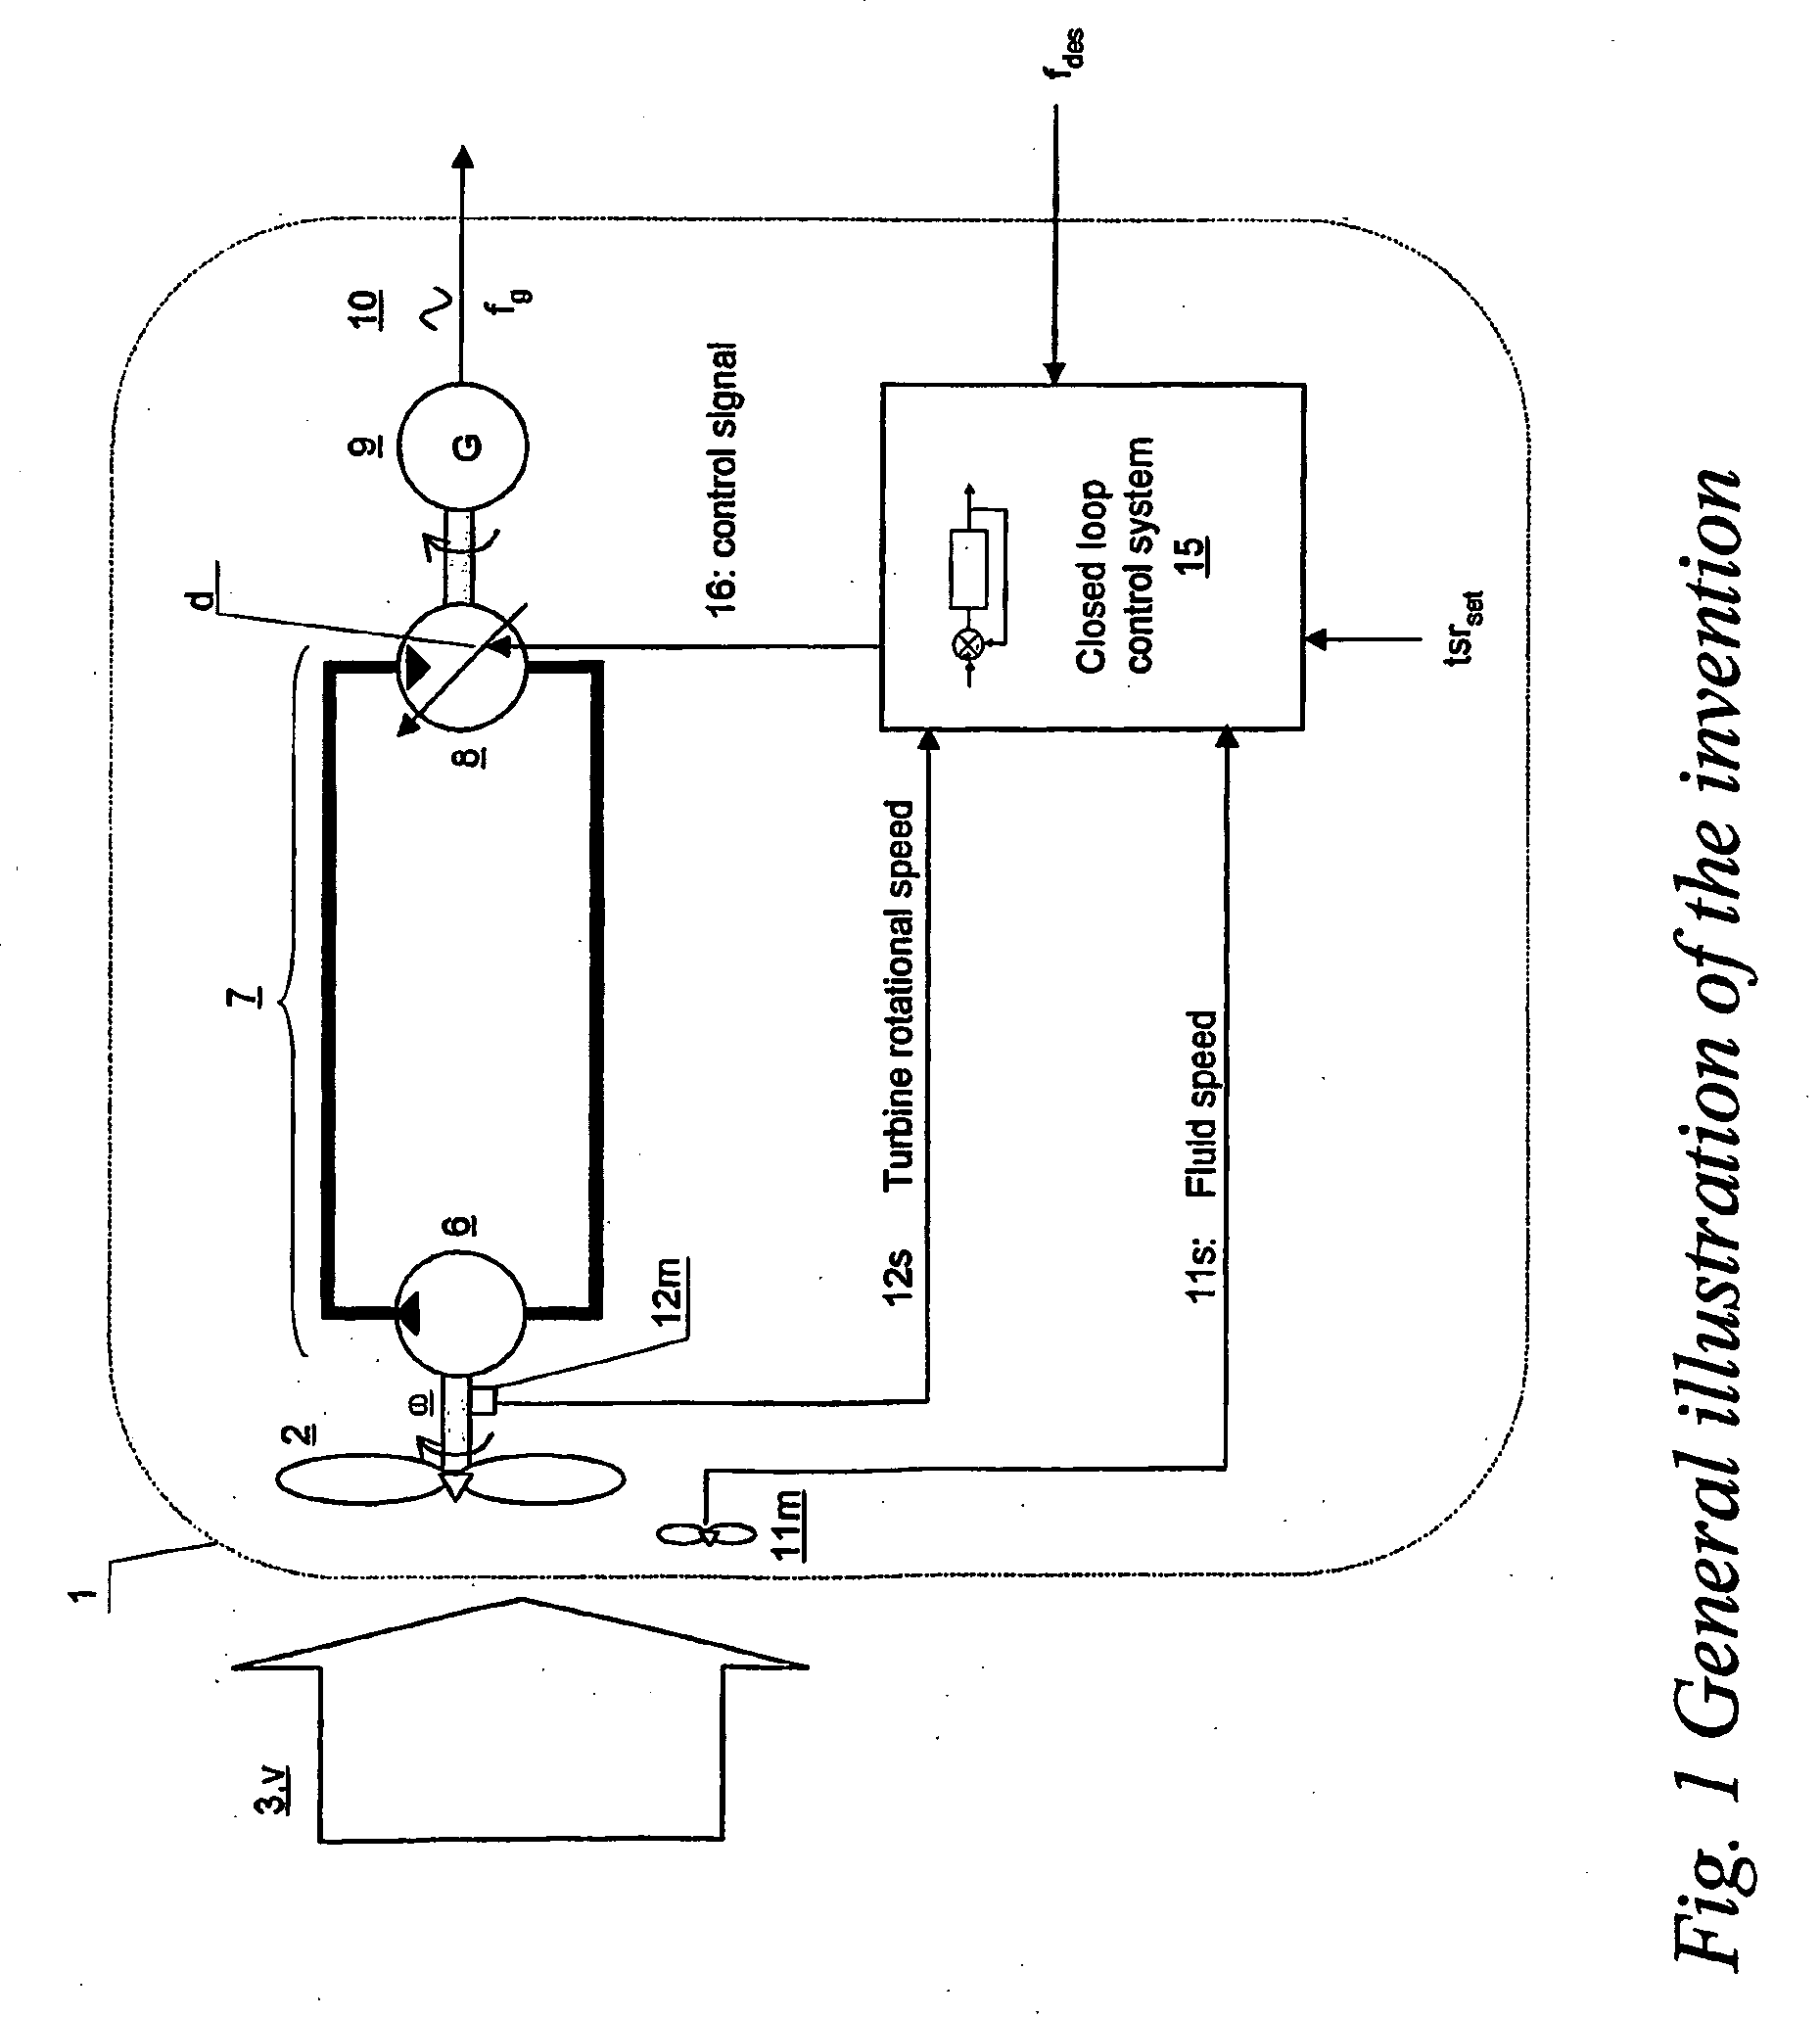 Turbine driven electric power production system and a method for control thereof